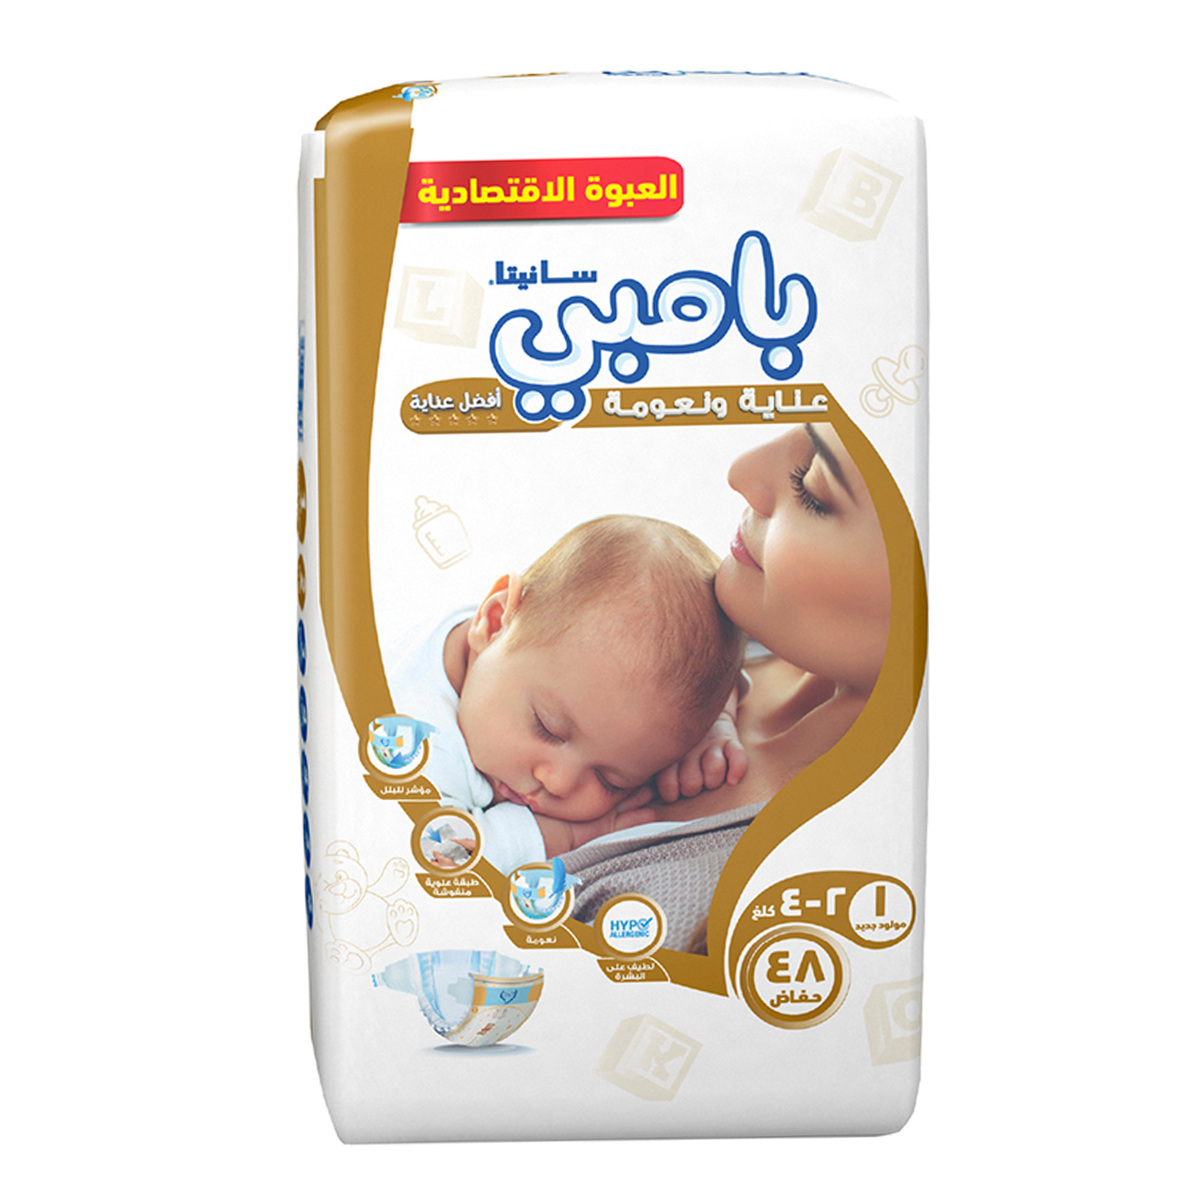 Sanita Bambi, Size 1, Newborn, 2-4 kg, Super Box, 168 Diapers : Buy Online  at Best Price in KSA - Souq is now : Baby Products